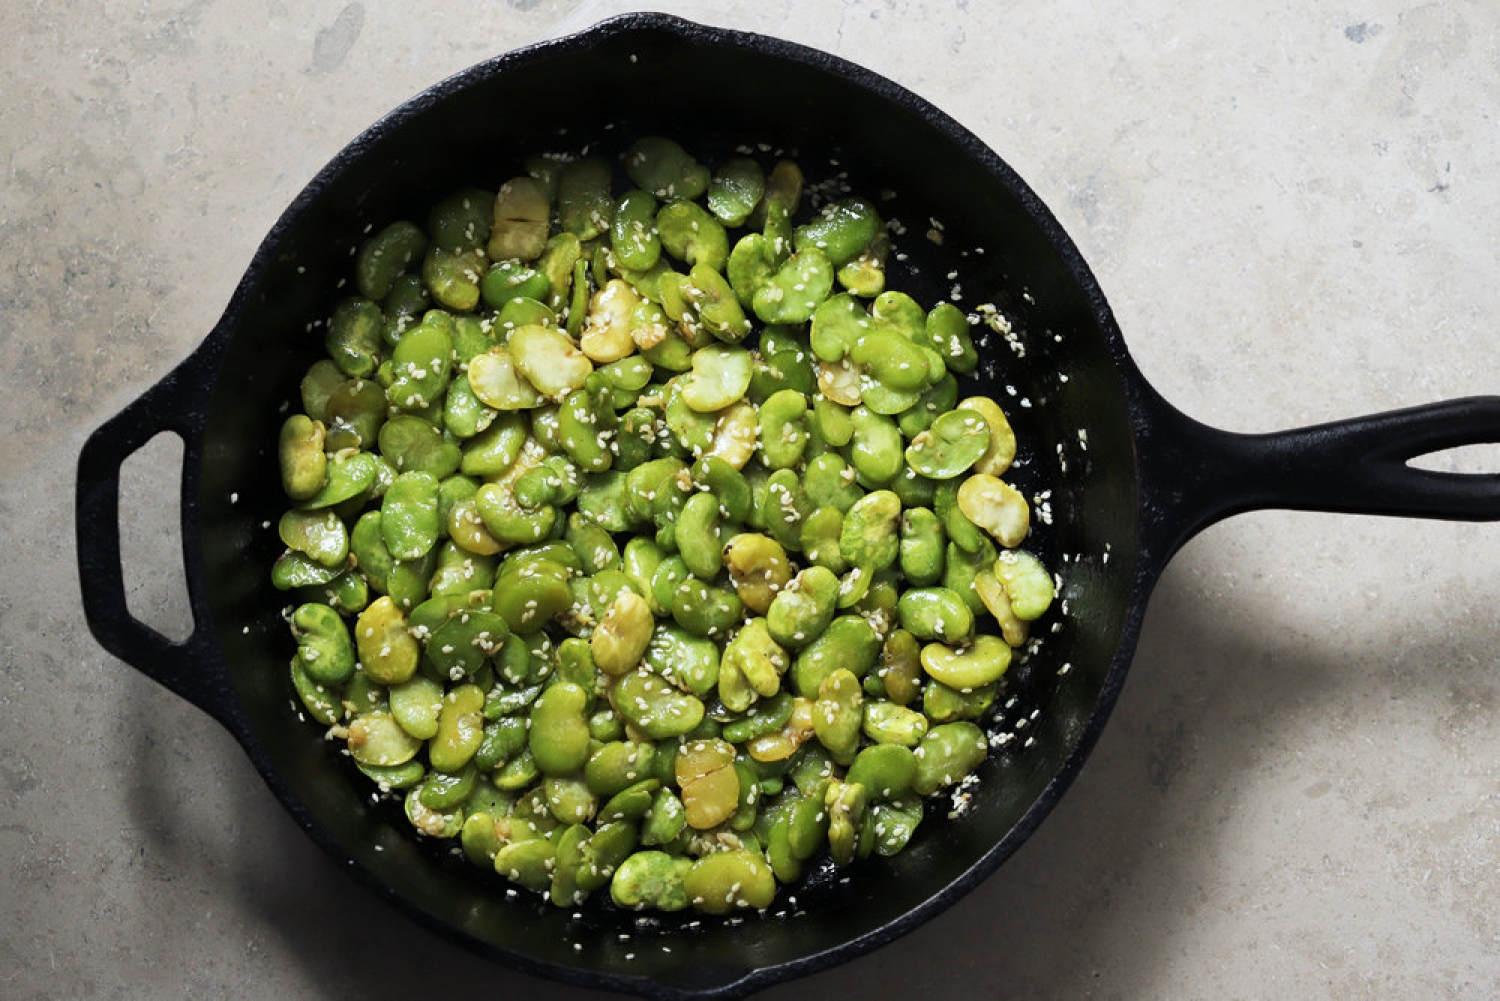 <p>Fava beans, also known as broad beans bring a bright source of protein to your plate and a slightly buttery flavor with a touch of bitterness. They are best prepared simply, as in <a href="https://www.cardamomandtea.com/blog/buttery-sesame-fava-beans" rel="noopener">this recipe</a>, with a sprinkling of sesame seeds for a crunchy finish. </p>